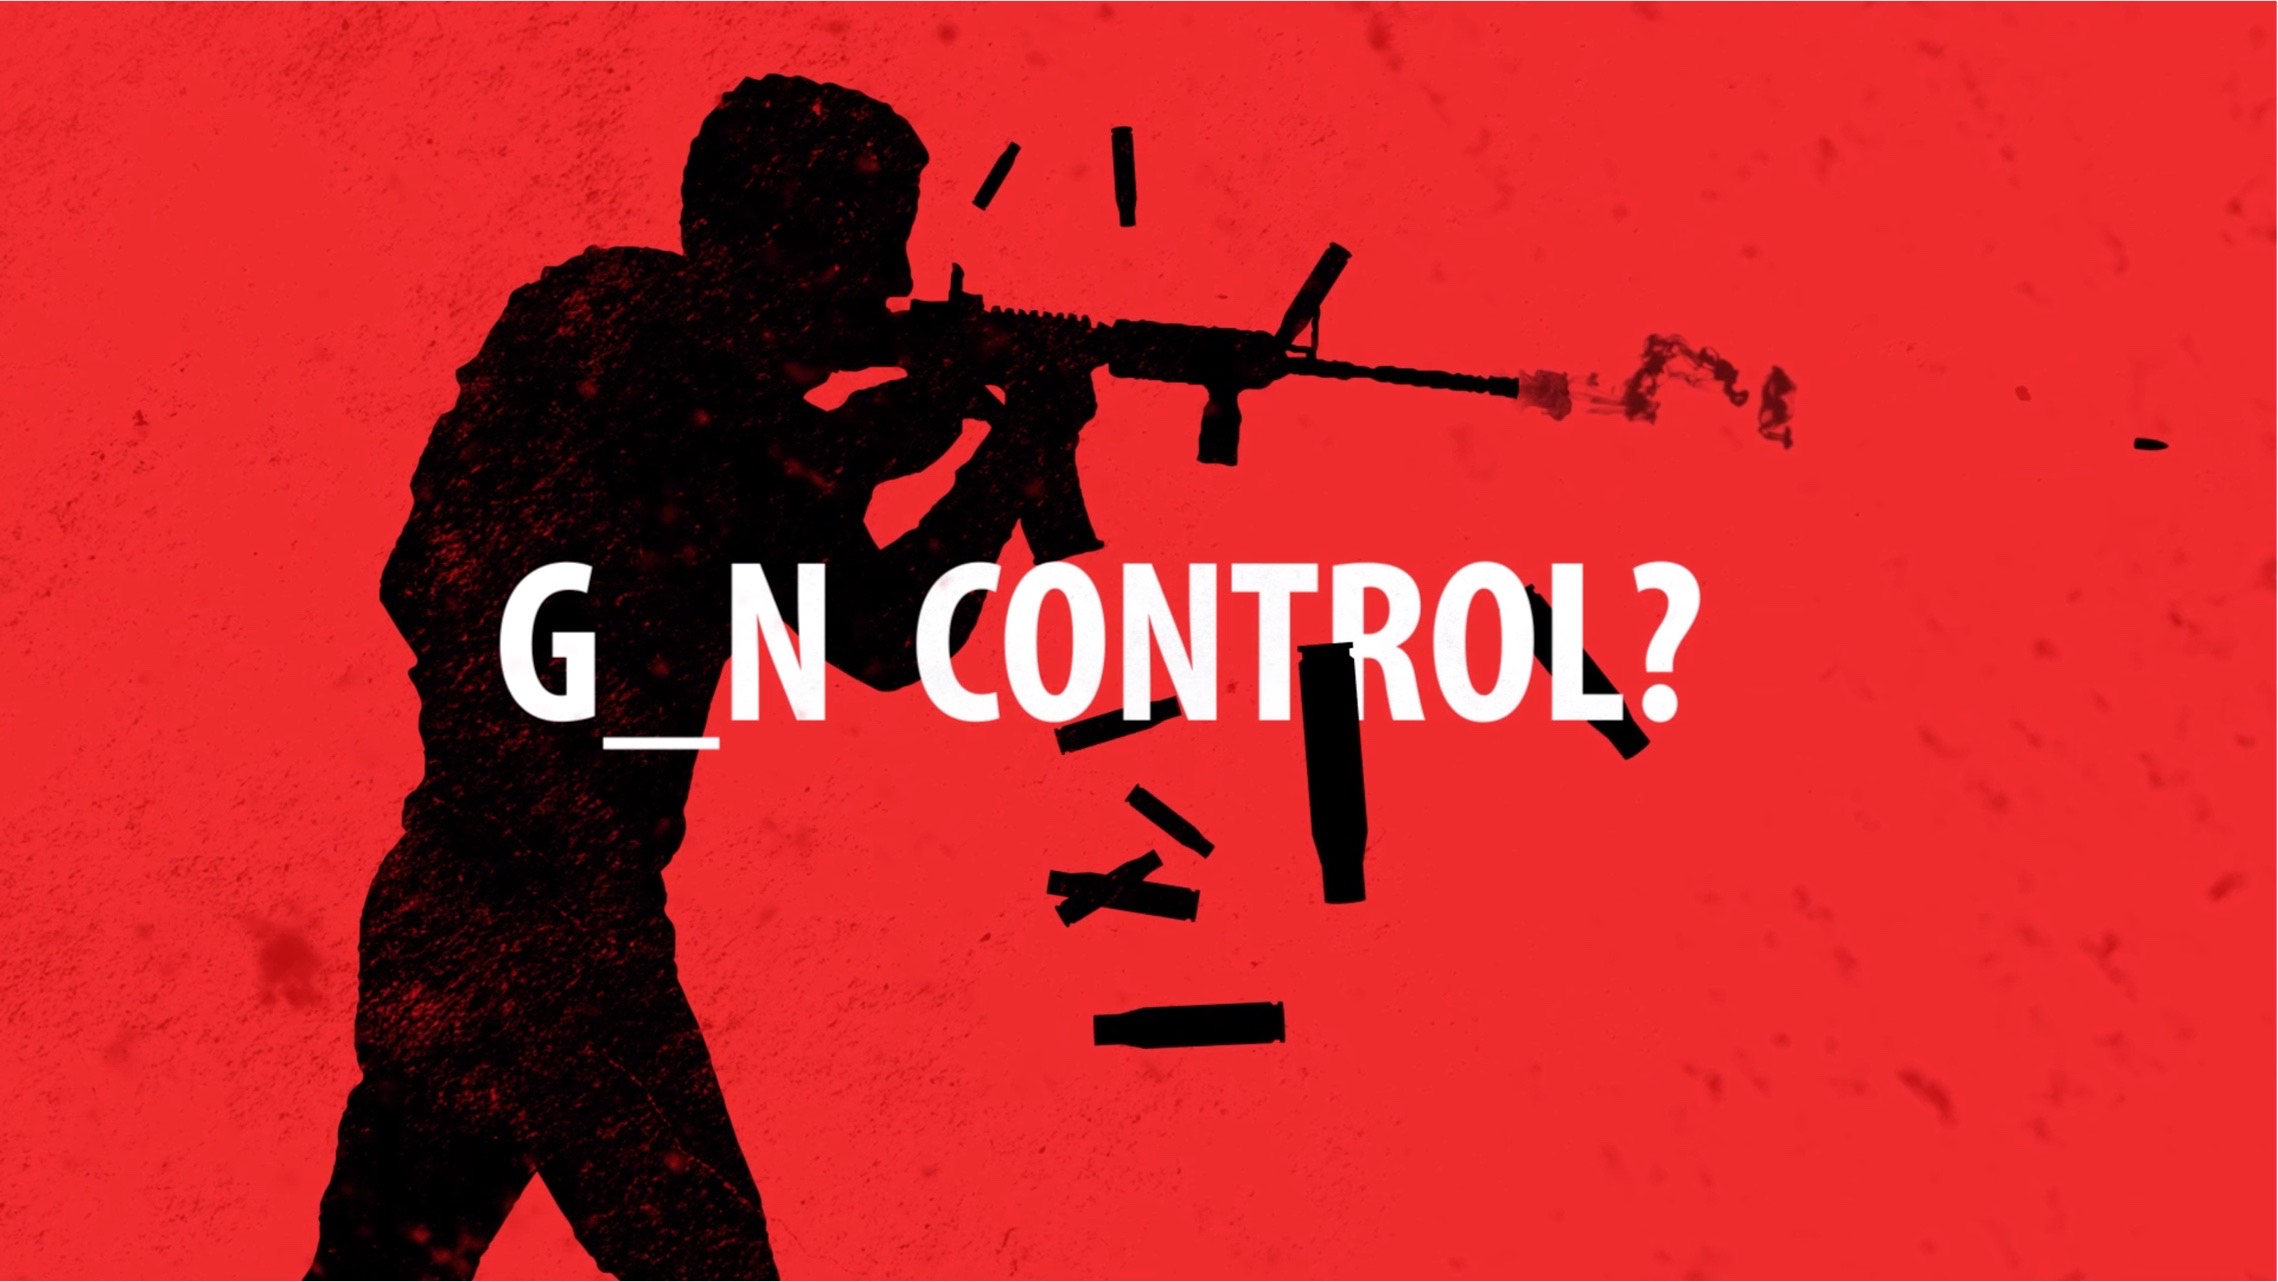 Silhouette of someone with an assault rifle, saying "G_N CONTROL" over top. Click to watch video.